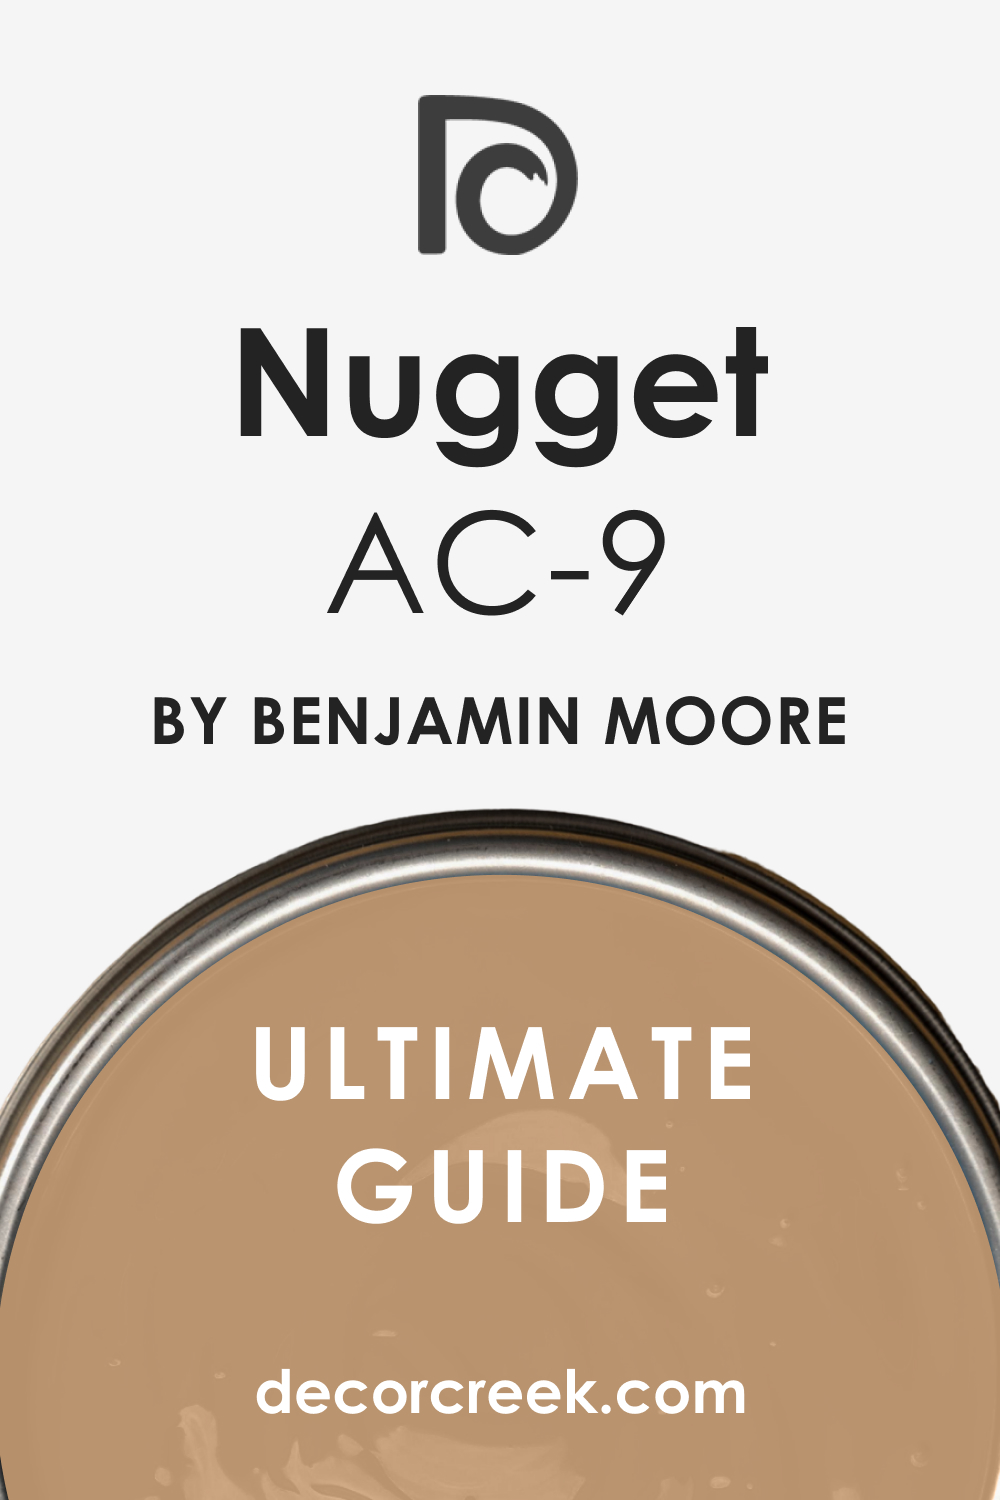 Ultimate Guide of Nugget AC-9 